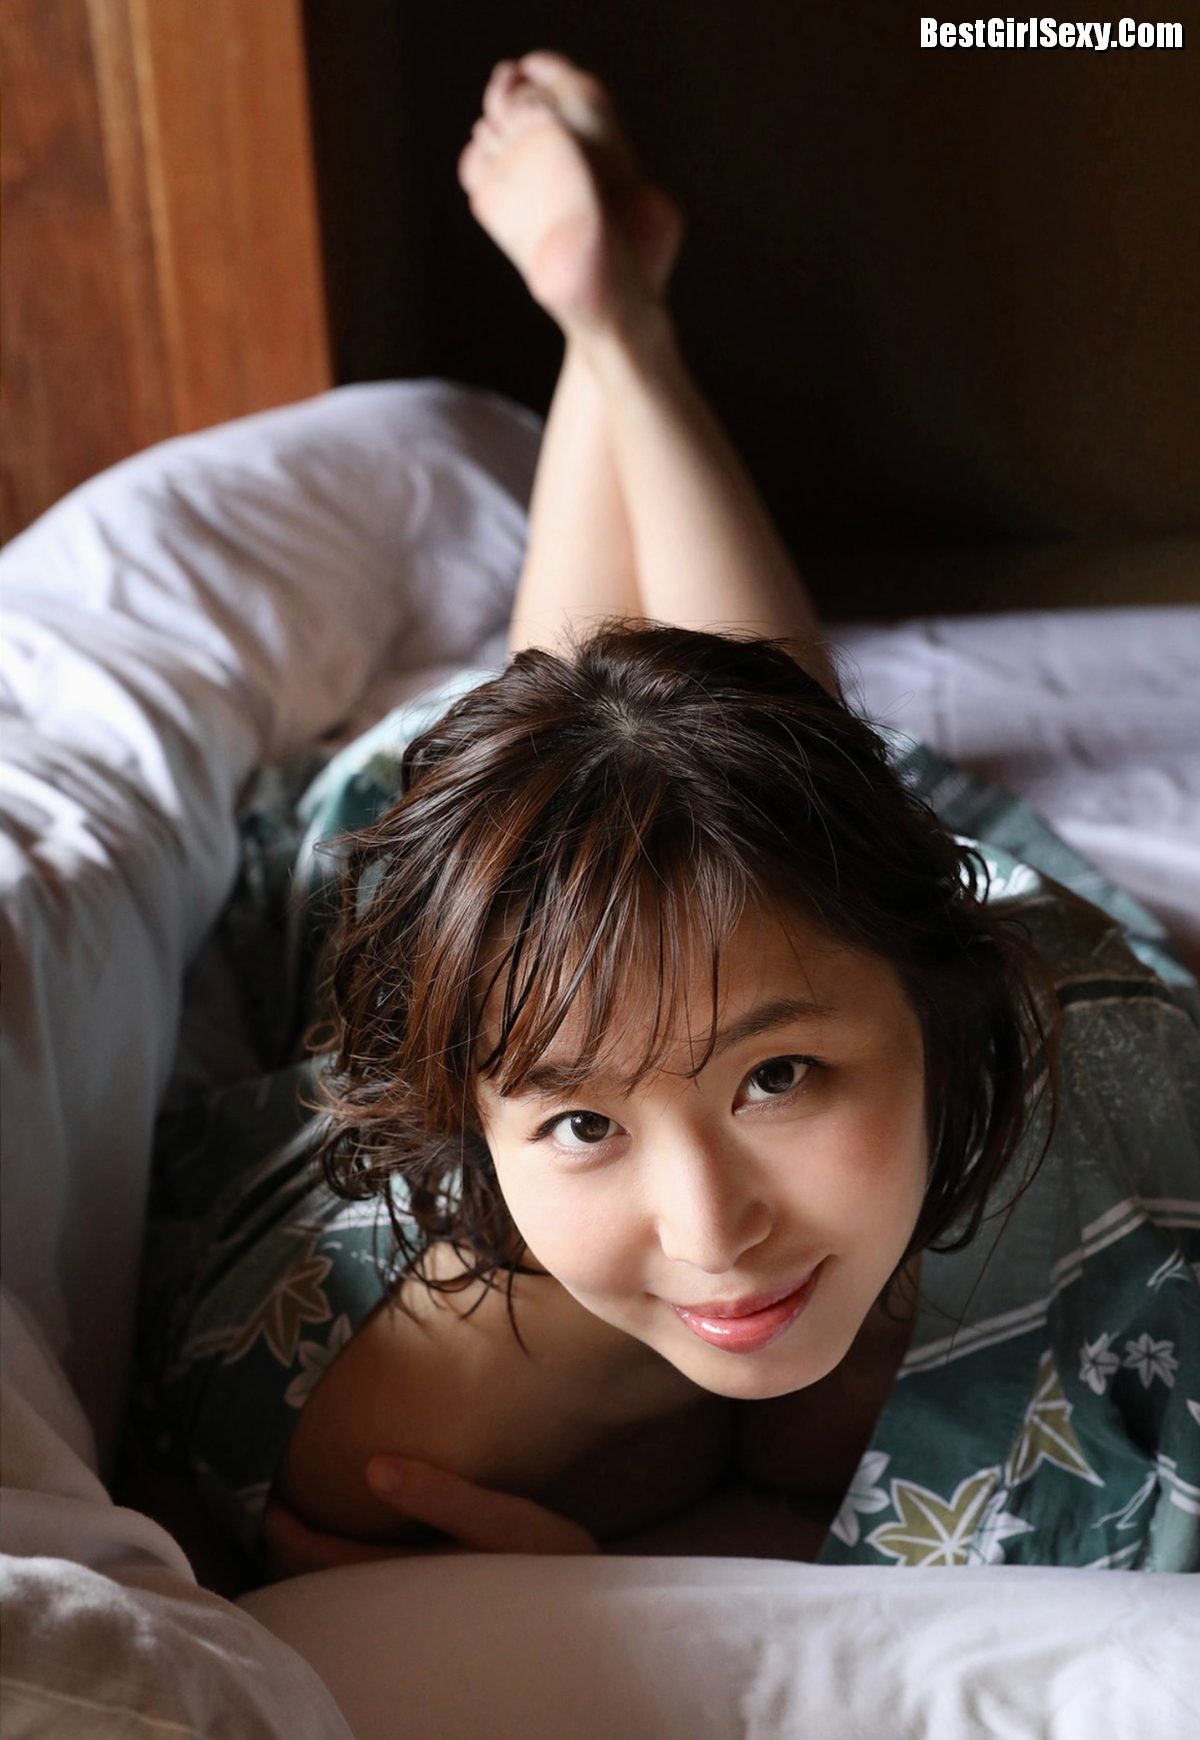 FRIDAY Misumi Shiochi 塩地美澄 One Night And Two Days A Special Journey Vol 3 0092 9847197675.jpg